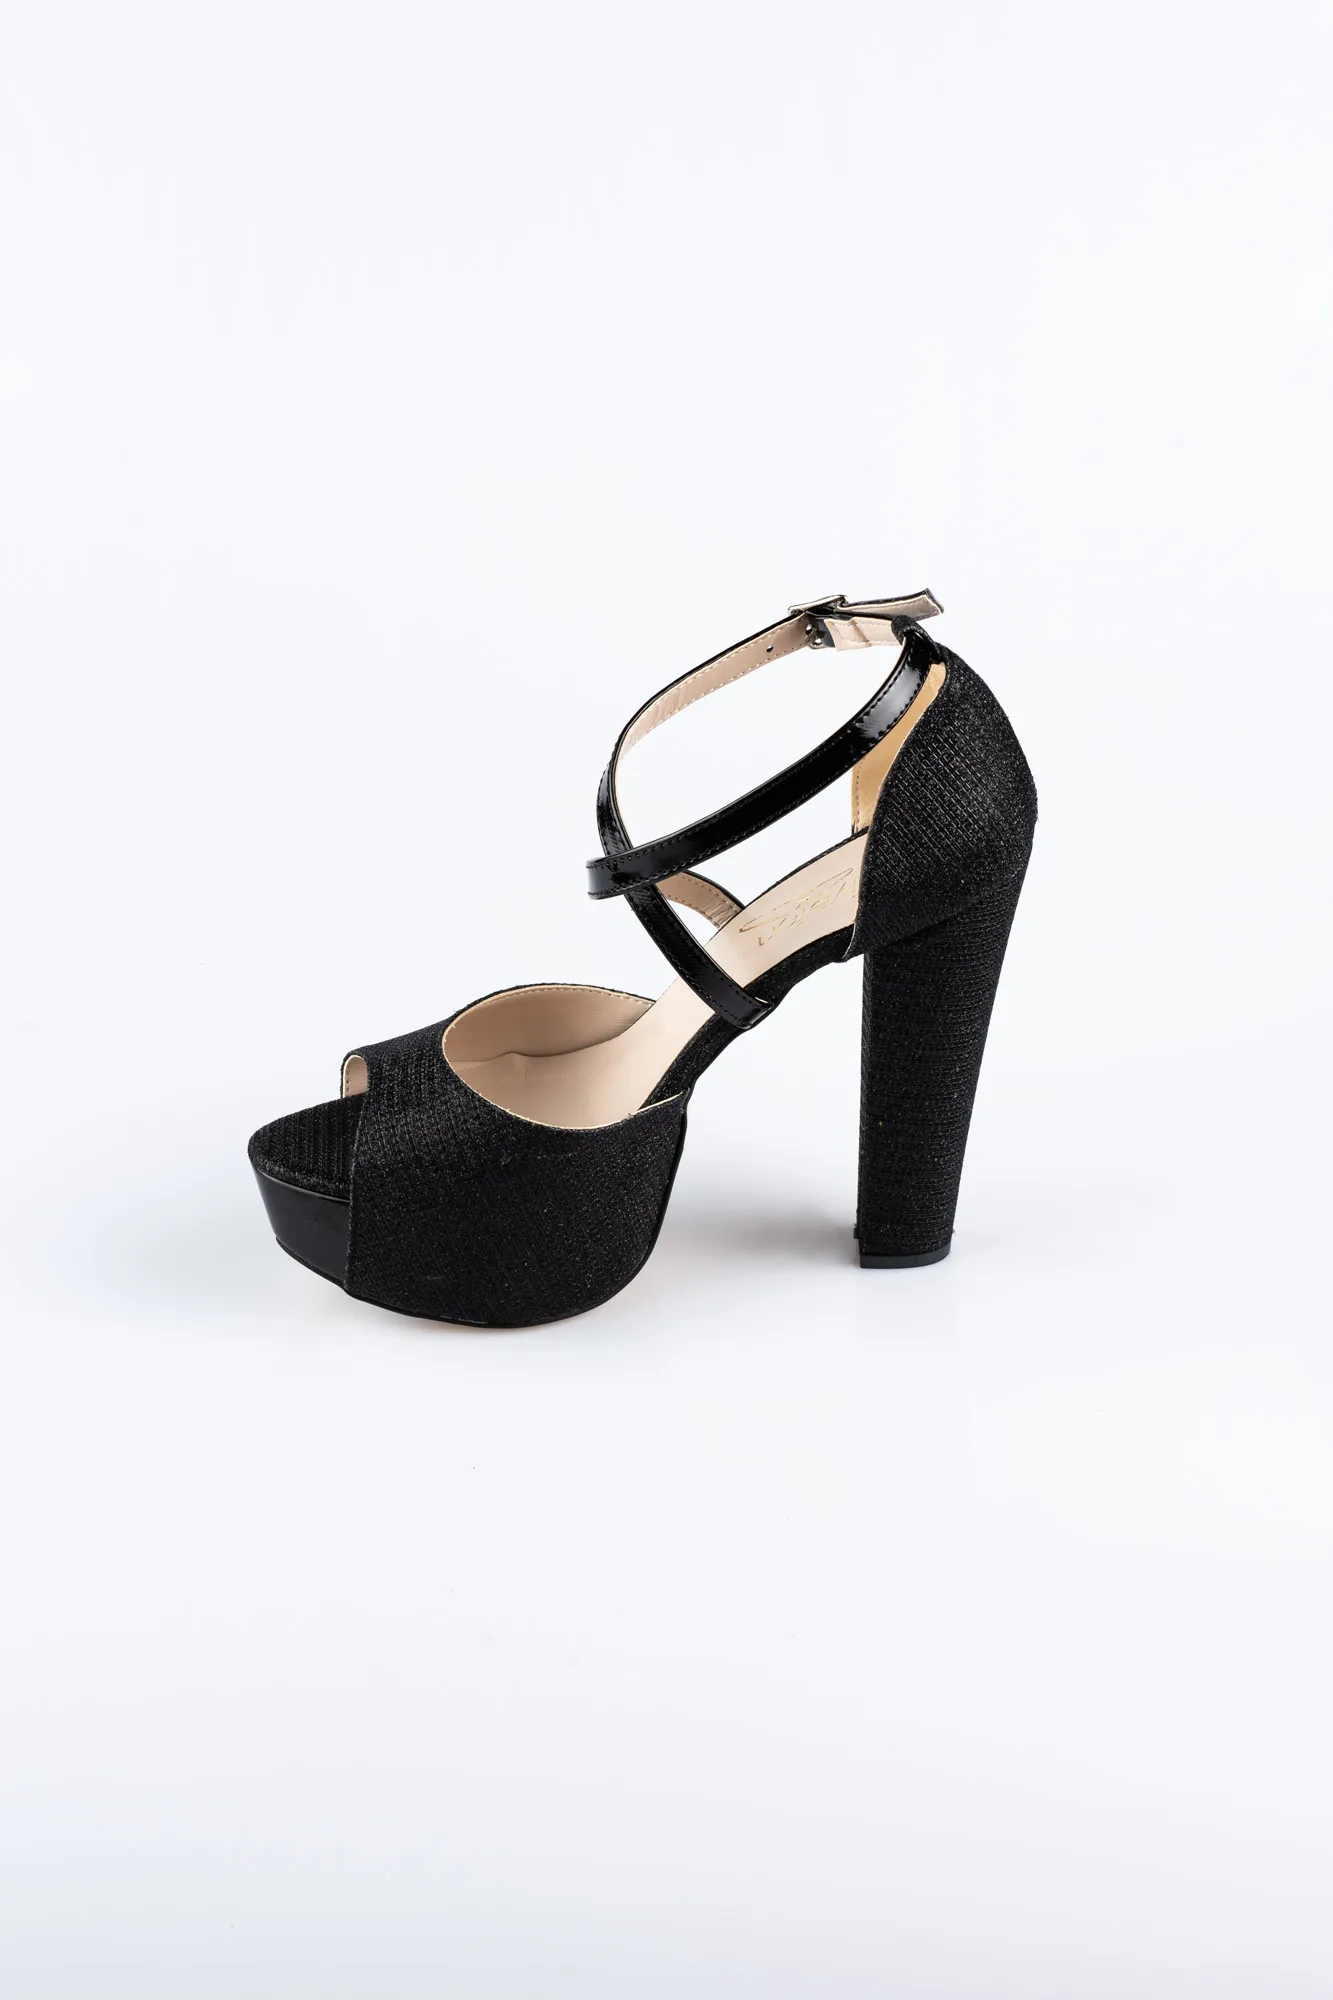 Black-Silvery Evening Shoe ABS1098